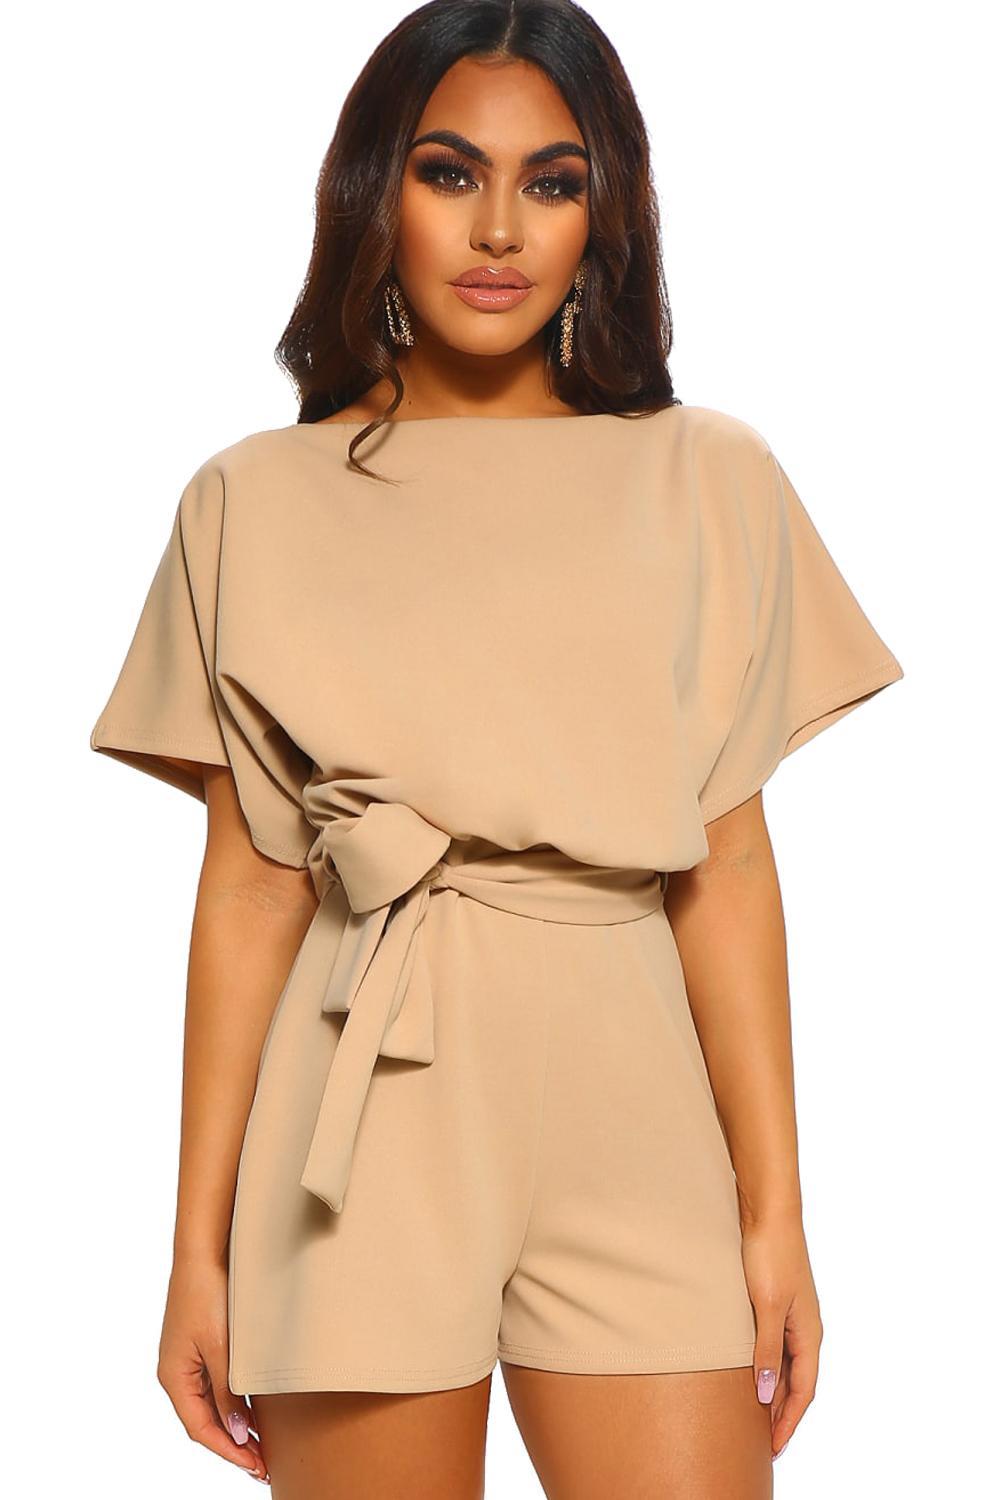 Over The Top Belted Playsuit